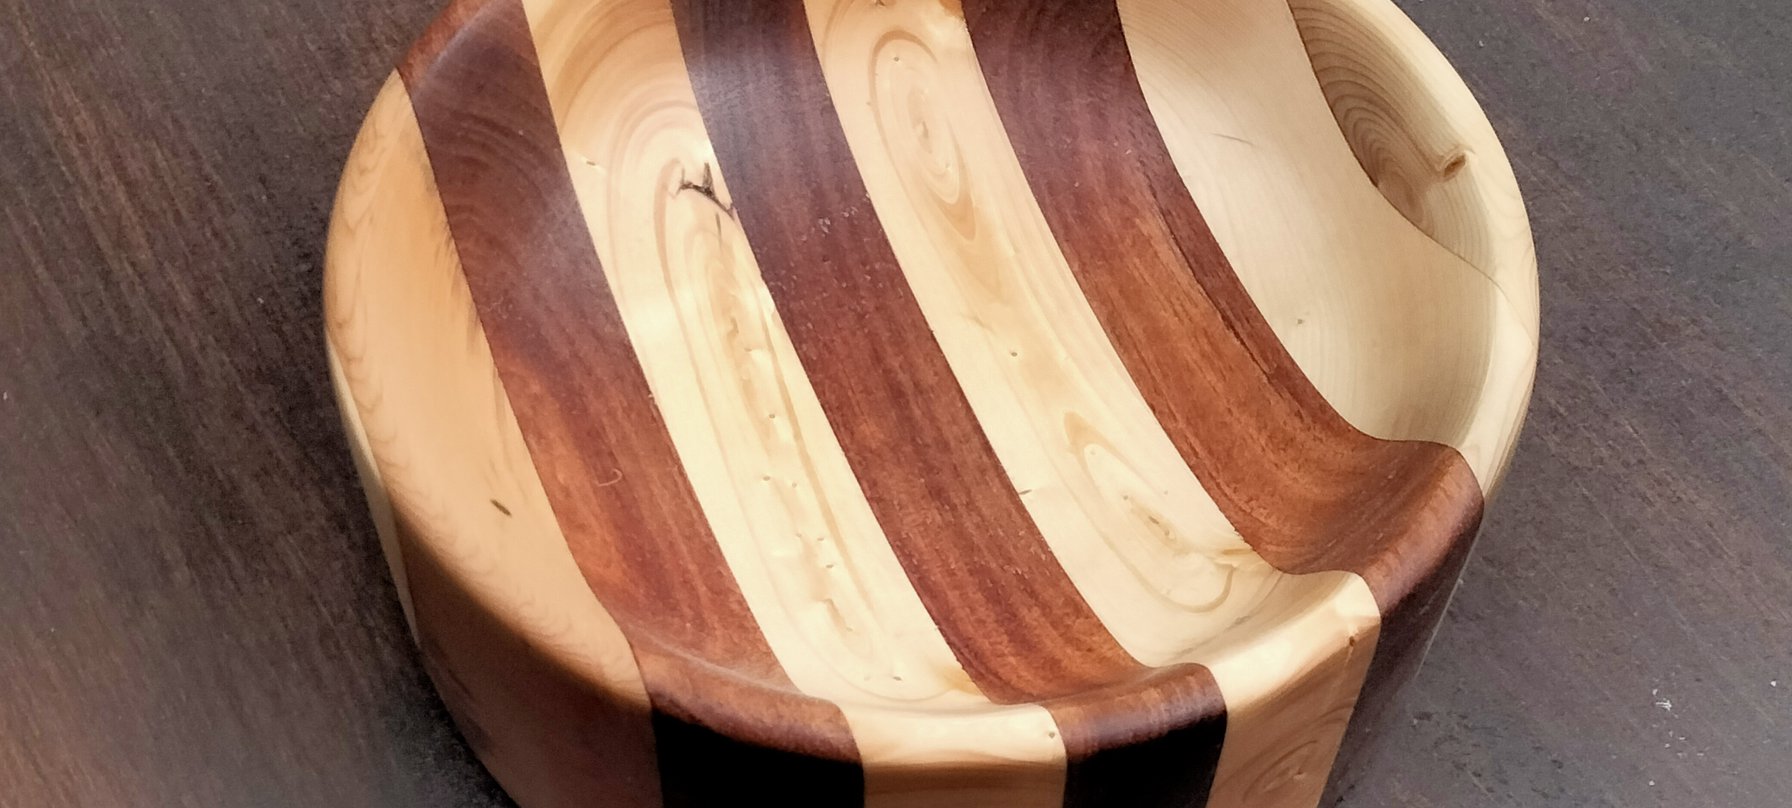 A photo of a smooth wooden bowl with alternating grains of light and deep brown wood running through its entirely. The bowl is sanded and oiled to look smooth and silky. Image West Coast Connect Inc.